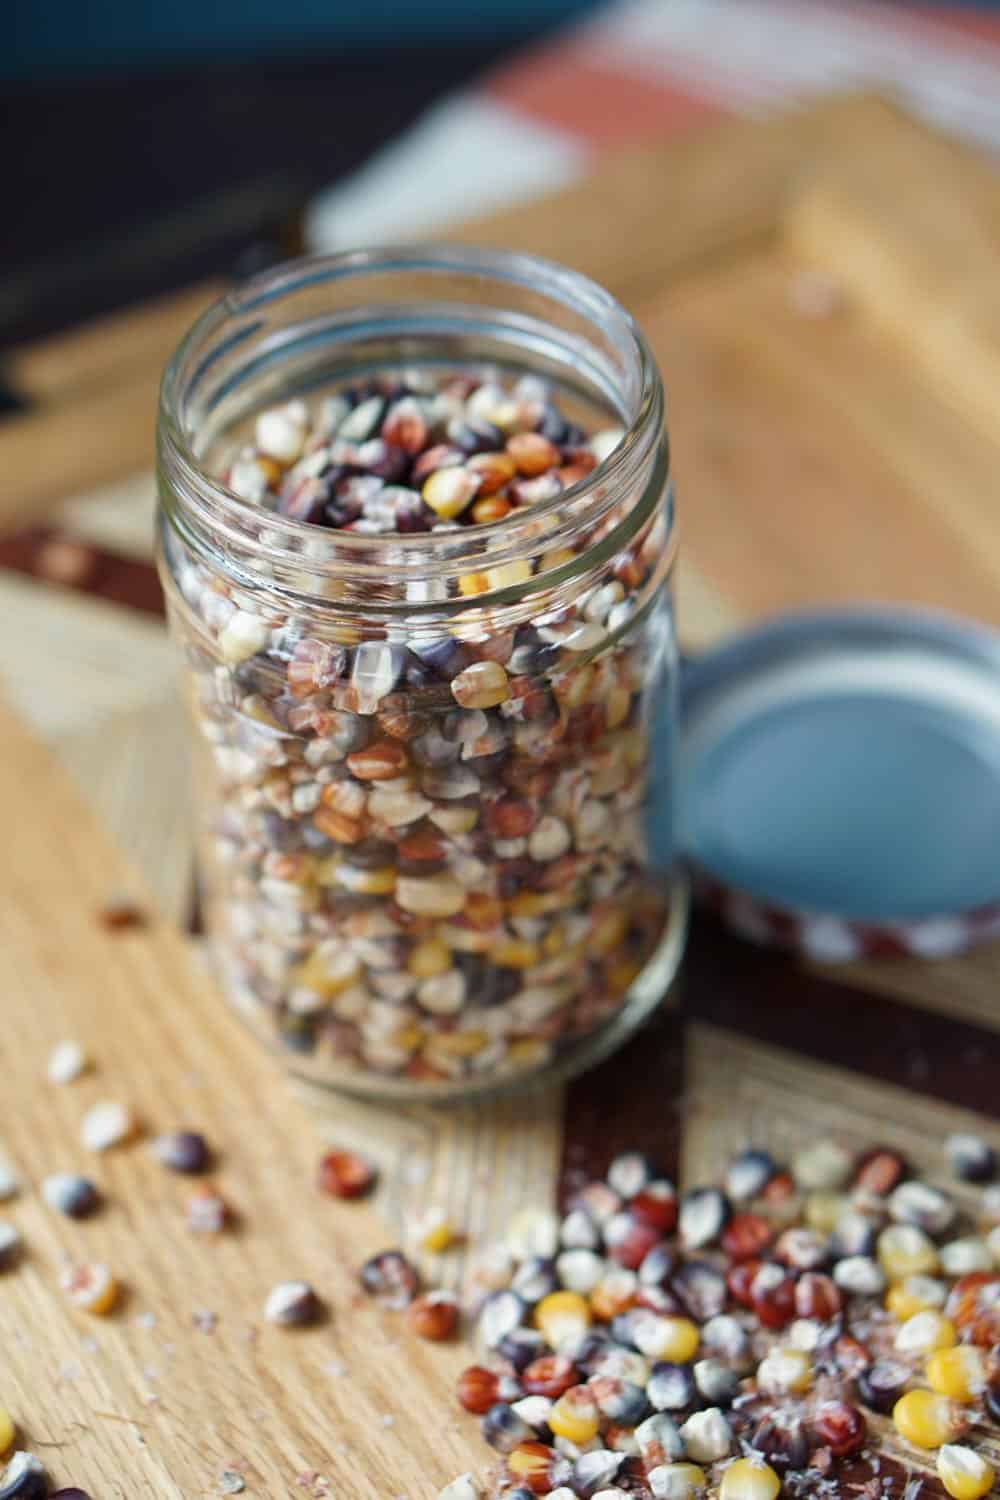 If like me after Thanksgiving you find yourself wondering: Can you eat Indian Corn? And if not, why is it on our table? Then, you're in luck! Read how to harvest and grind that colorful decorative corn into flour, to use it as popcorn, and how it evolved into Modern Sweet Cor